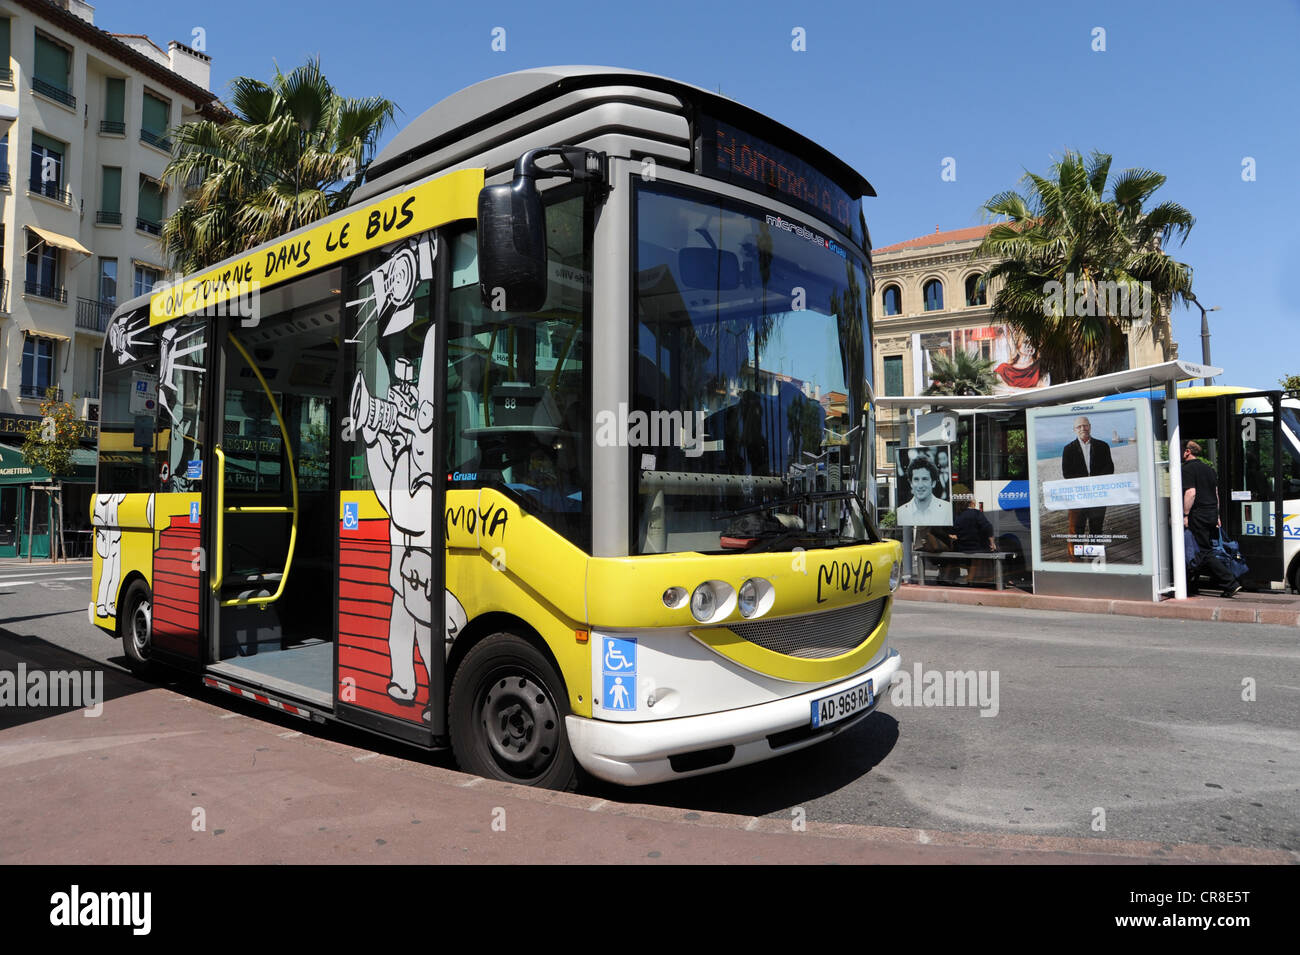 City bus, old town of Cannes, Côte d'Azur, France, Europe Stock Photo